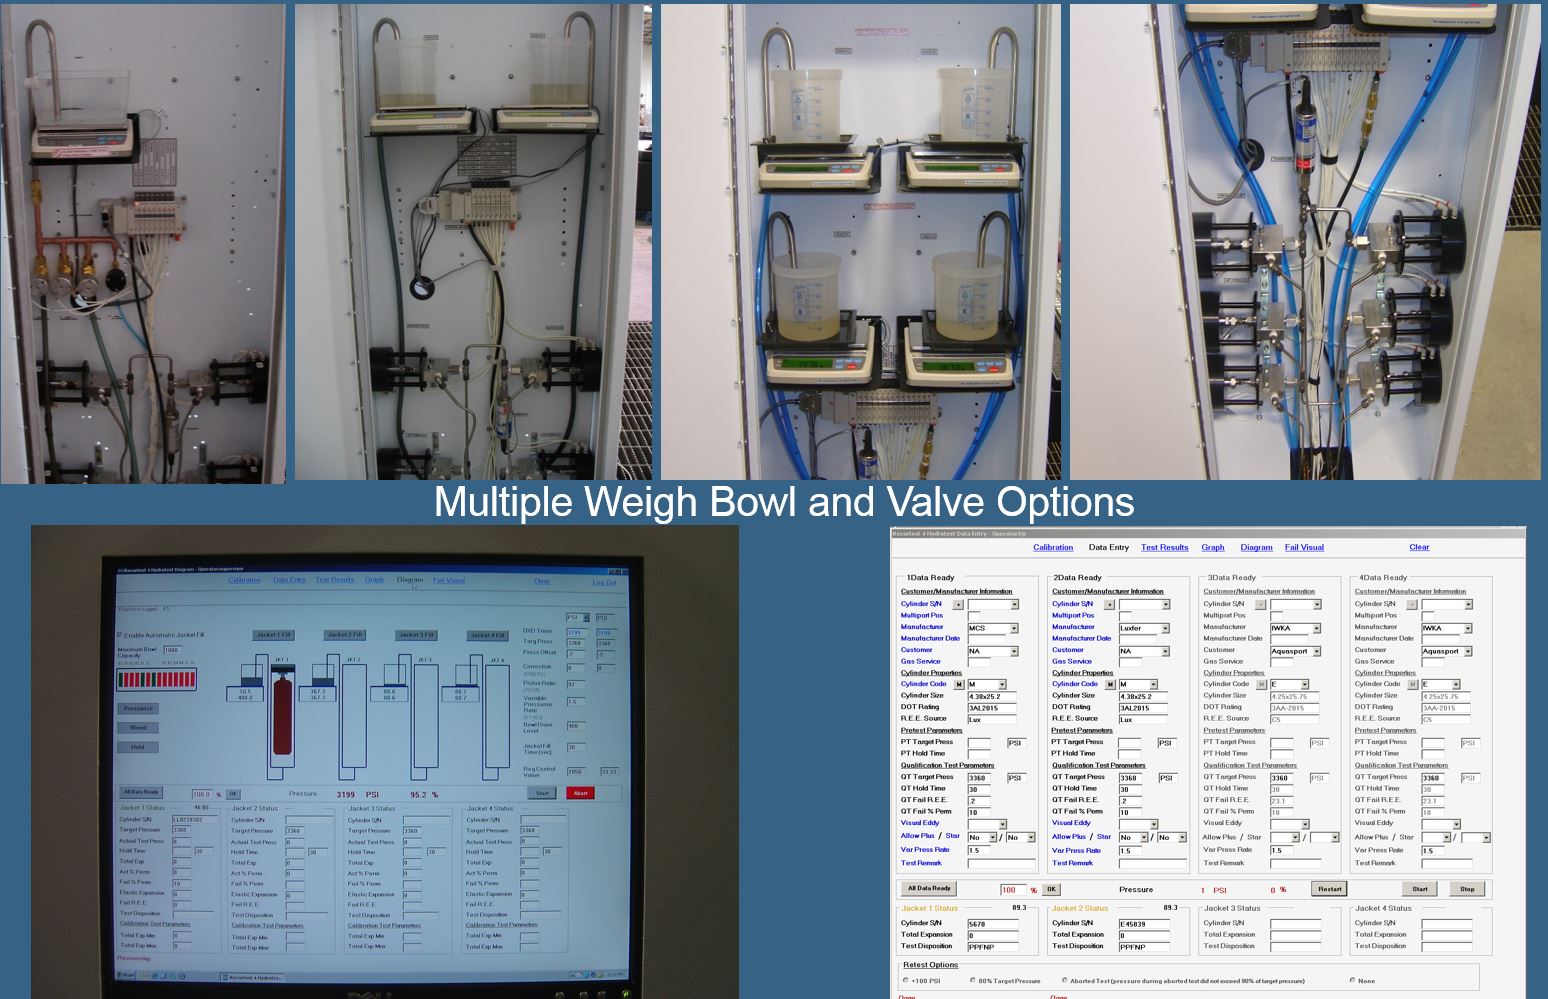 Hydrostatic Multiple Weigh Bowl and Valve Options